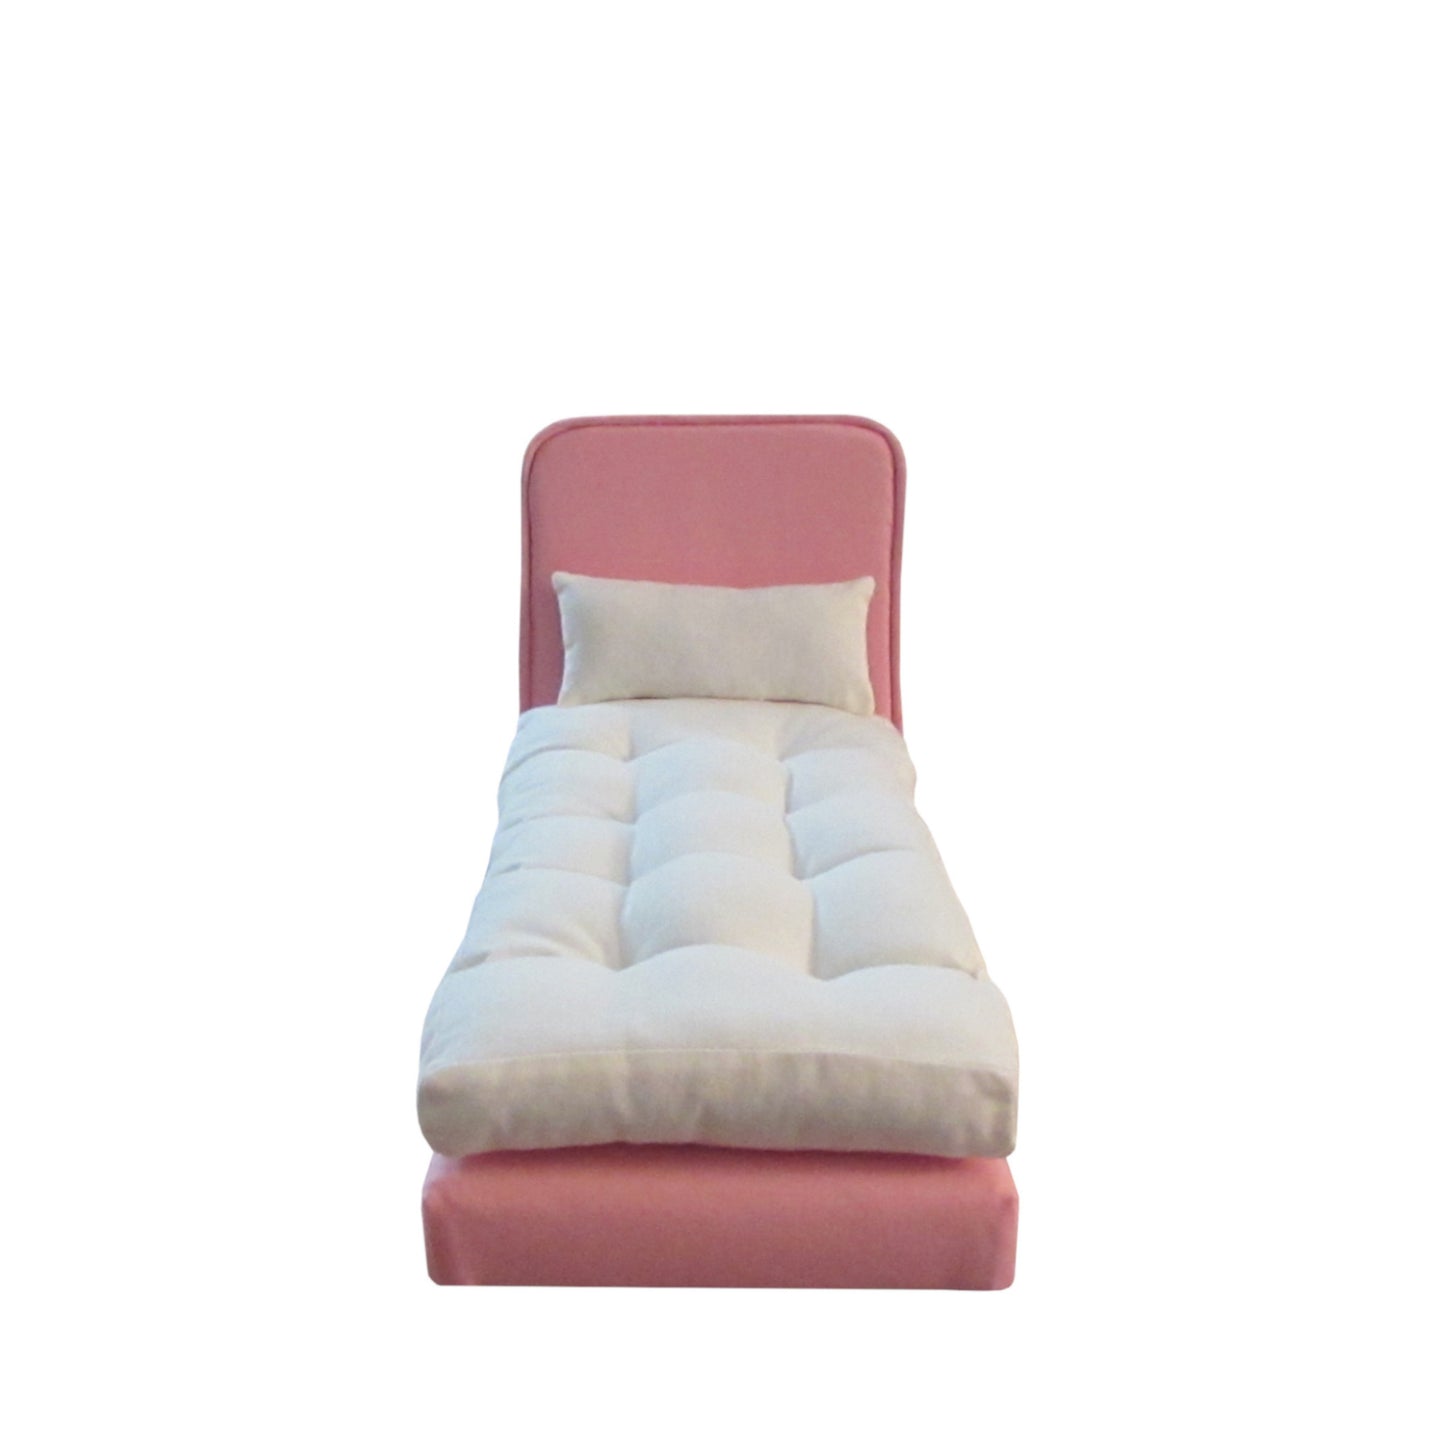 Upholstered Light Pink Doll Bed, Mattress, and Pillow for 11 1/2-inch and 12-inch dolls Front view for multiple beds